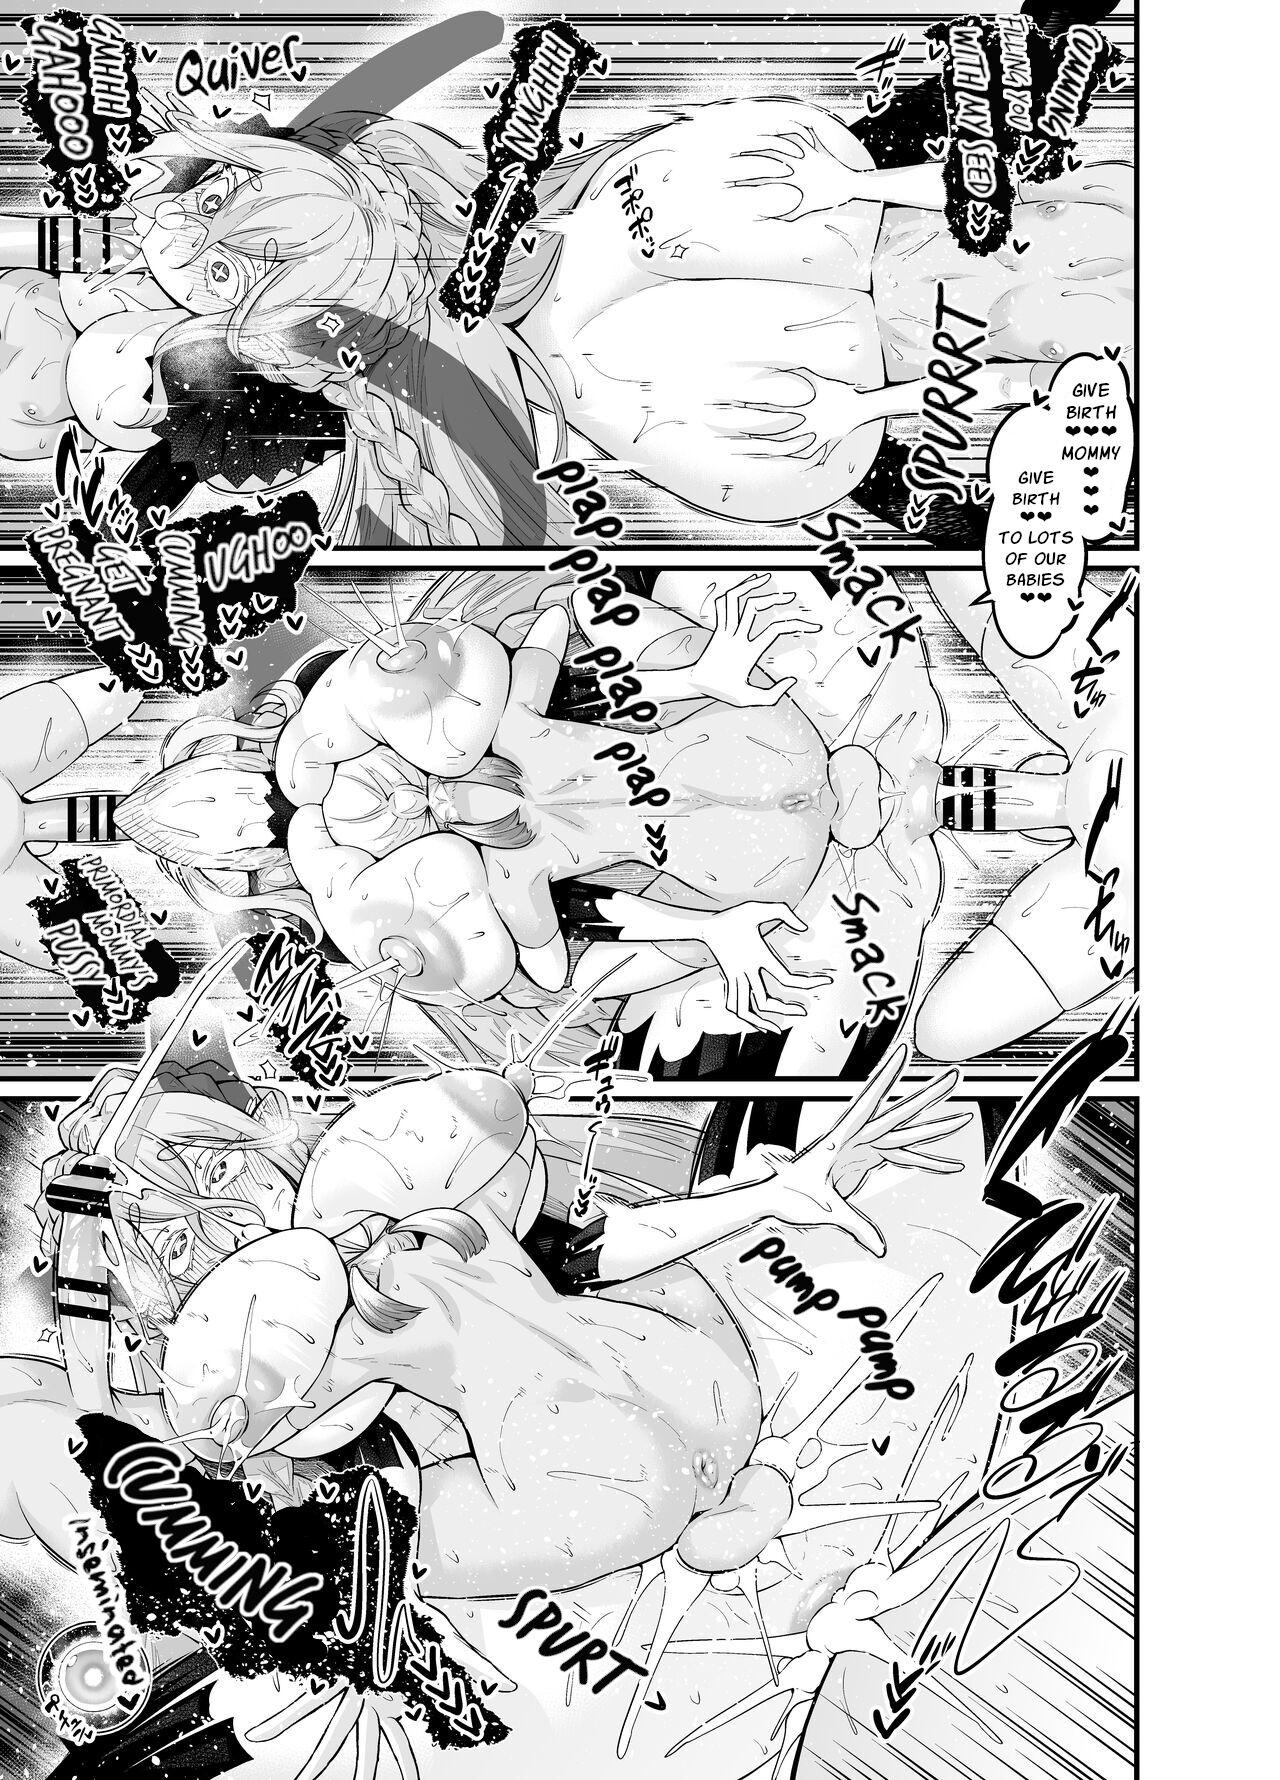 Pussysex Tiamat, Astolfo to Nakayoku Suru | Tiamat getting friendly with Astolfo and the boys - Fate grand order Gay Bus - Page 5